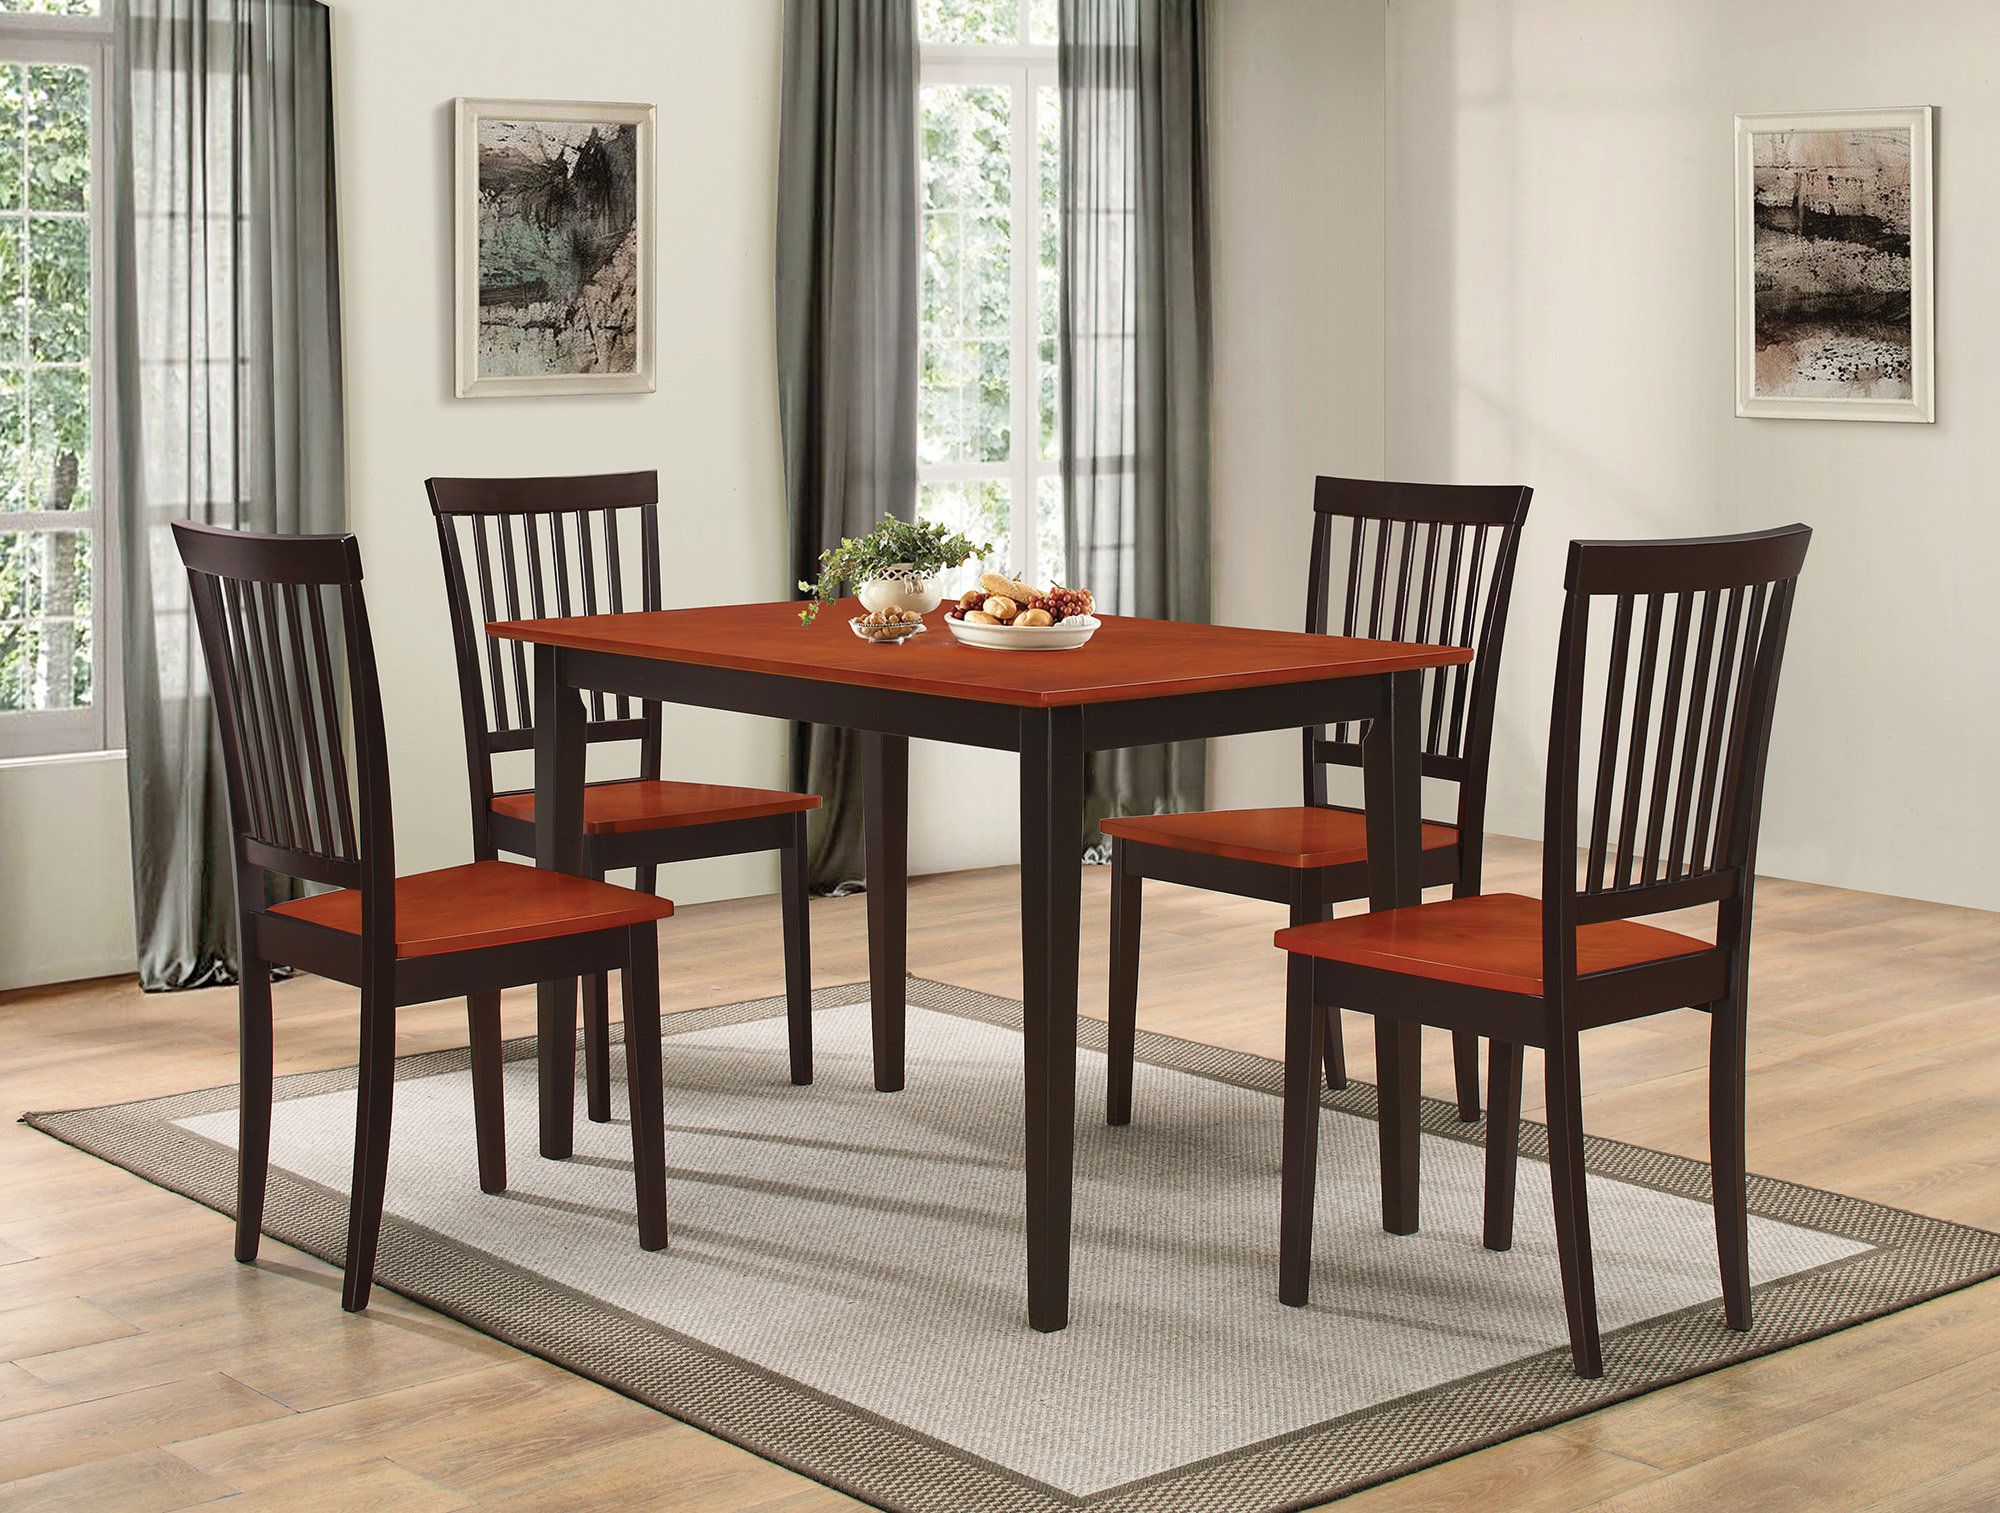 Best And Newest Pattonsburg 5 Piece Dining Sets Inside Gracie Oaks Pattonsburg 5 Piece Dining Set & Reviews (Photo 1 of 25)